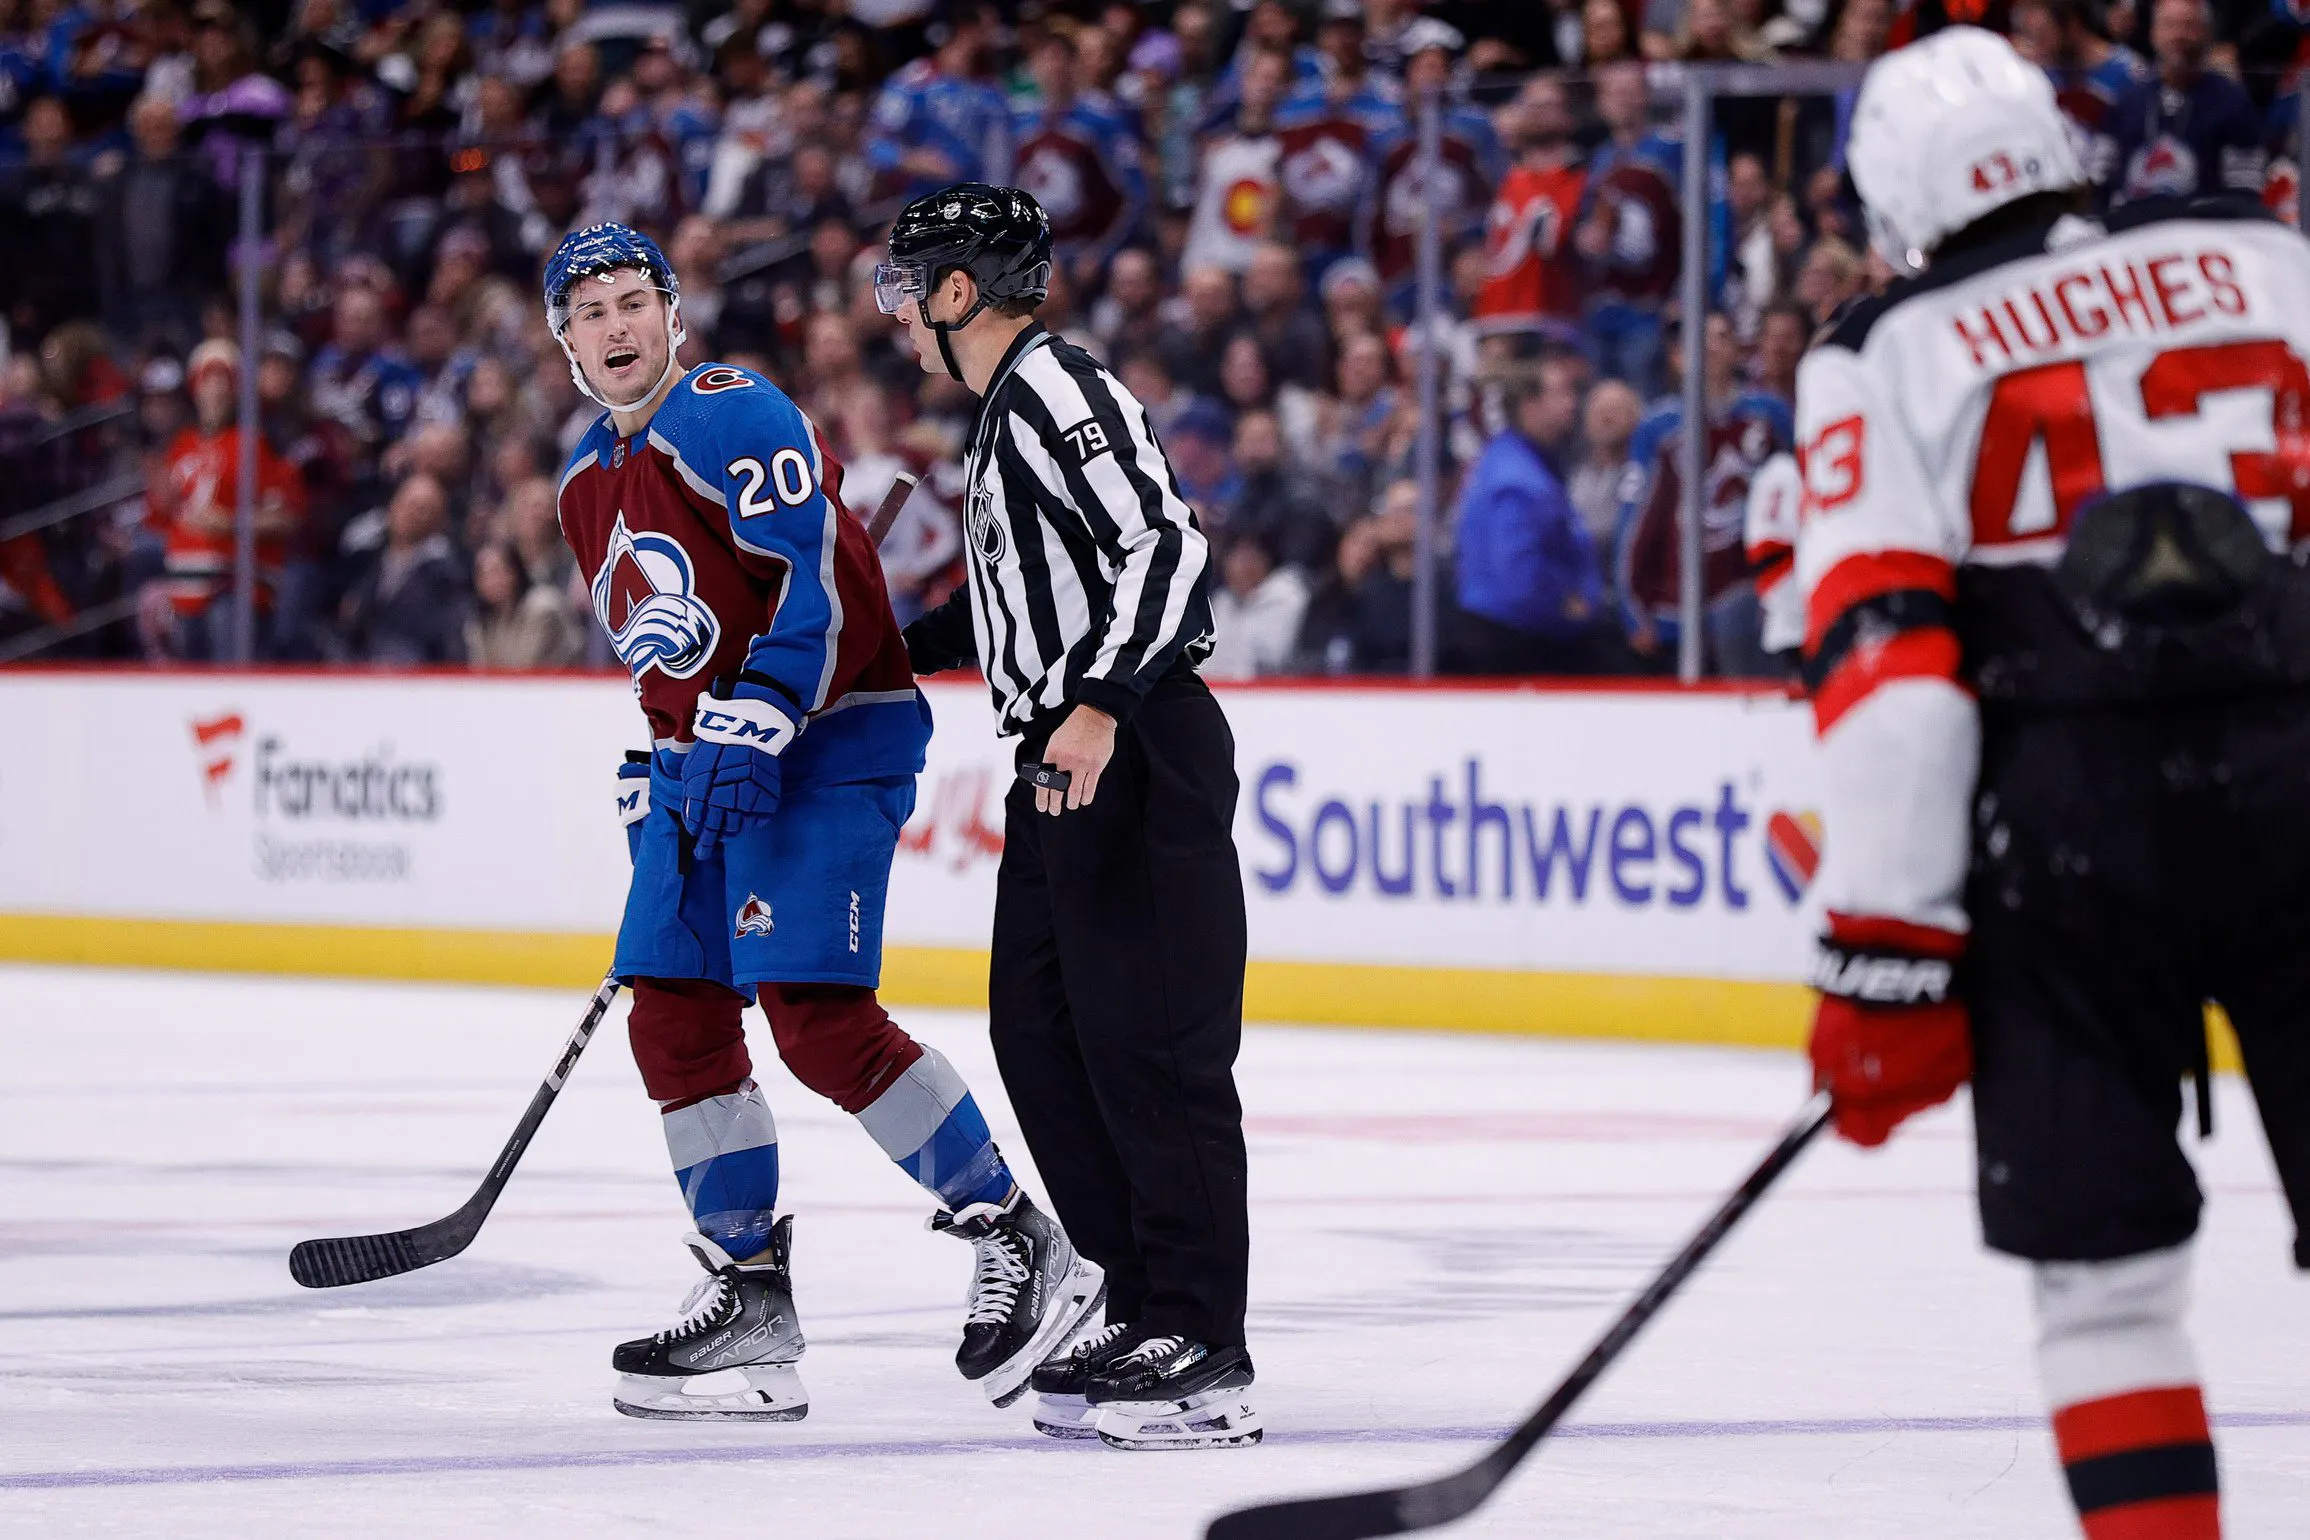 Colorado Avalanche’s Ross Colton fined $5,000 for cross-checking